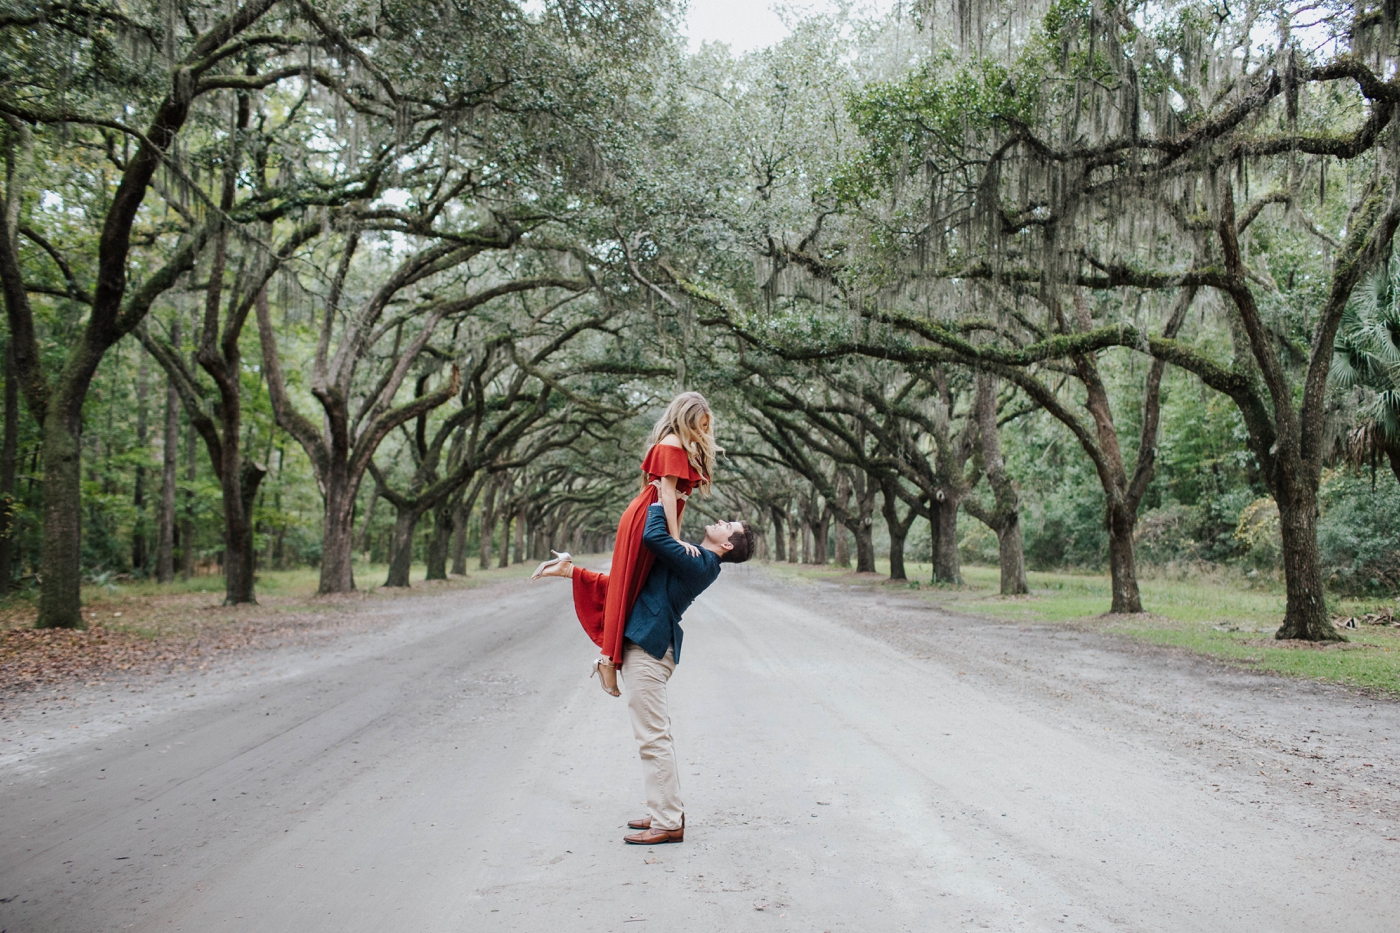 Macy & Matthew’s engagement session at Wormsloe in Savannah | Izzy and Co.